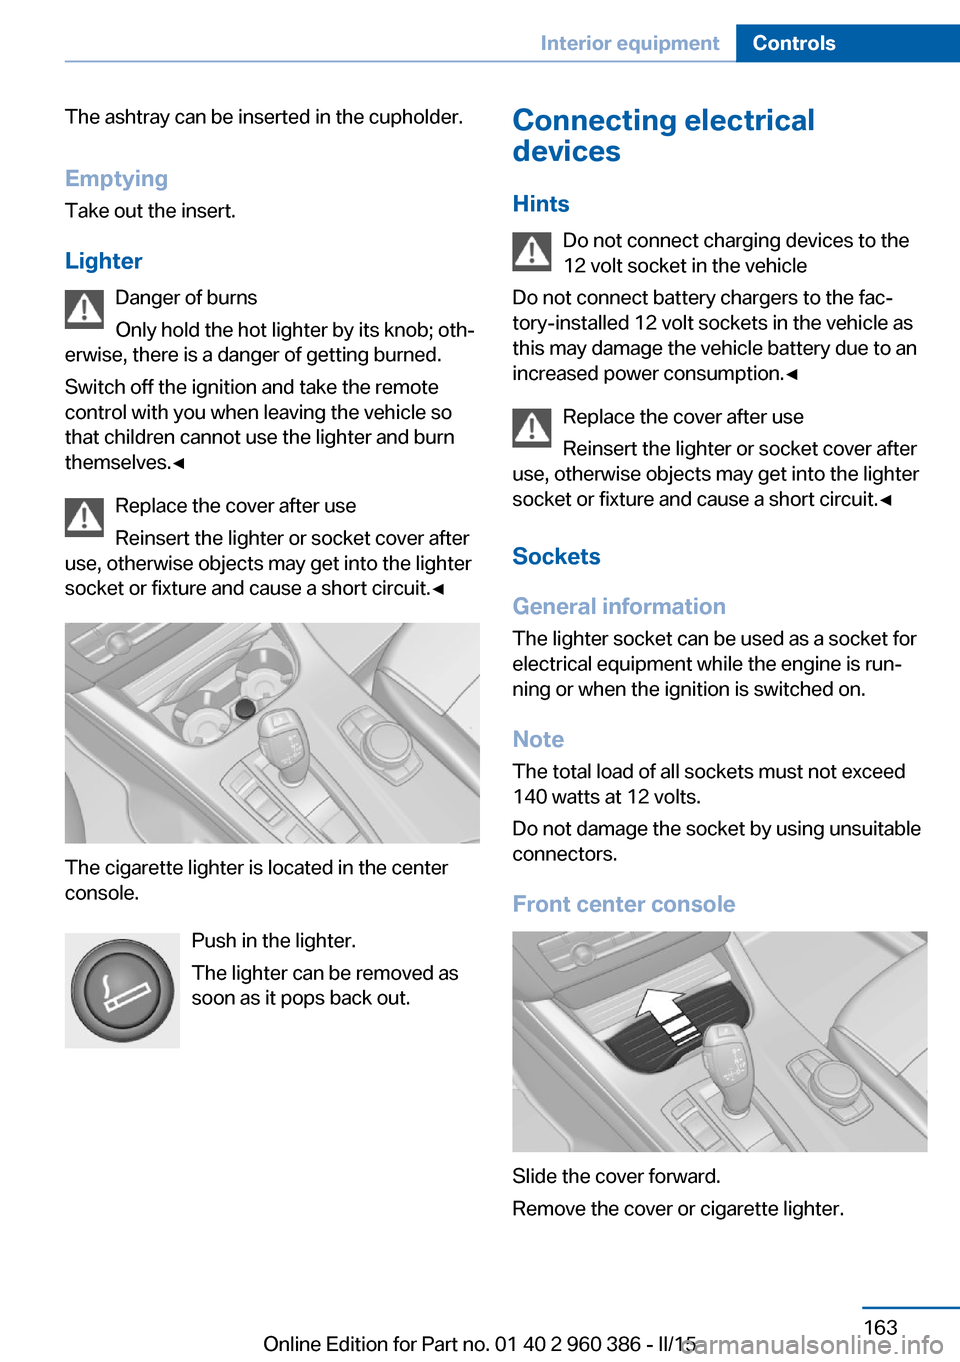 BMW X3 2016 F25 Owners Manual The ashtray can be inserted in the cupholder.
Emptying Take out the insert.
Lighter Danger of burns
Only hold the hot lighter by its knob; oth‐
erwise, there is a danger of getting burned.
Switch of